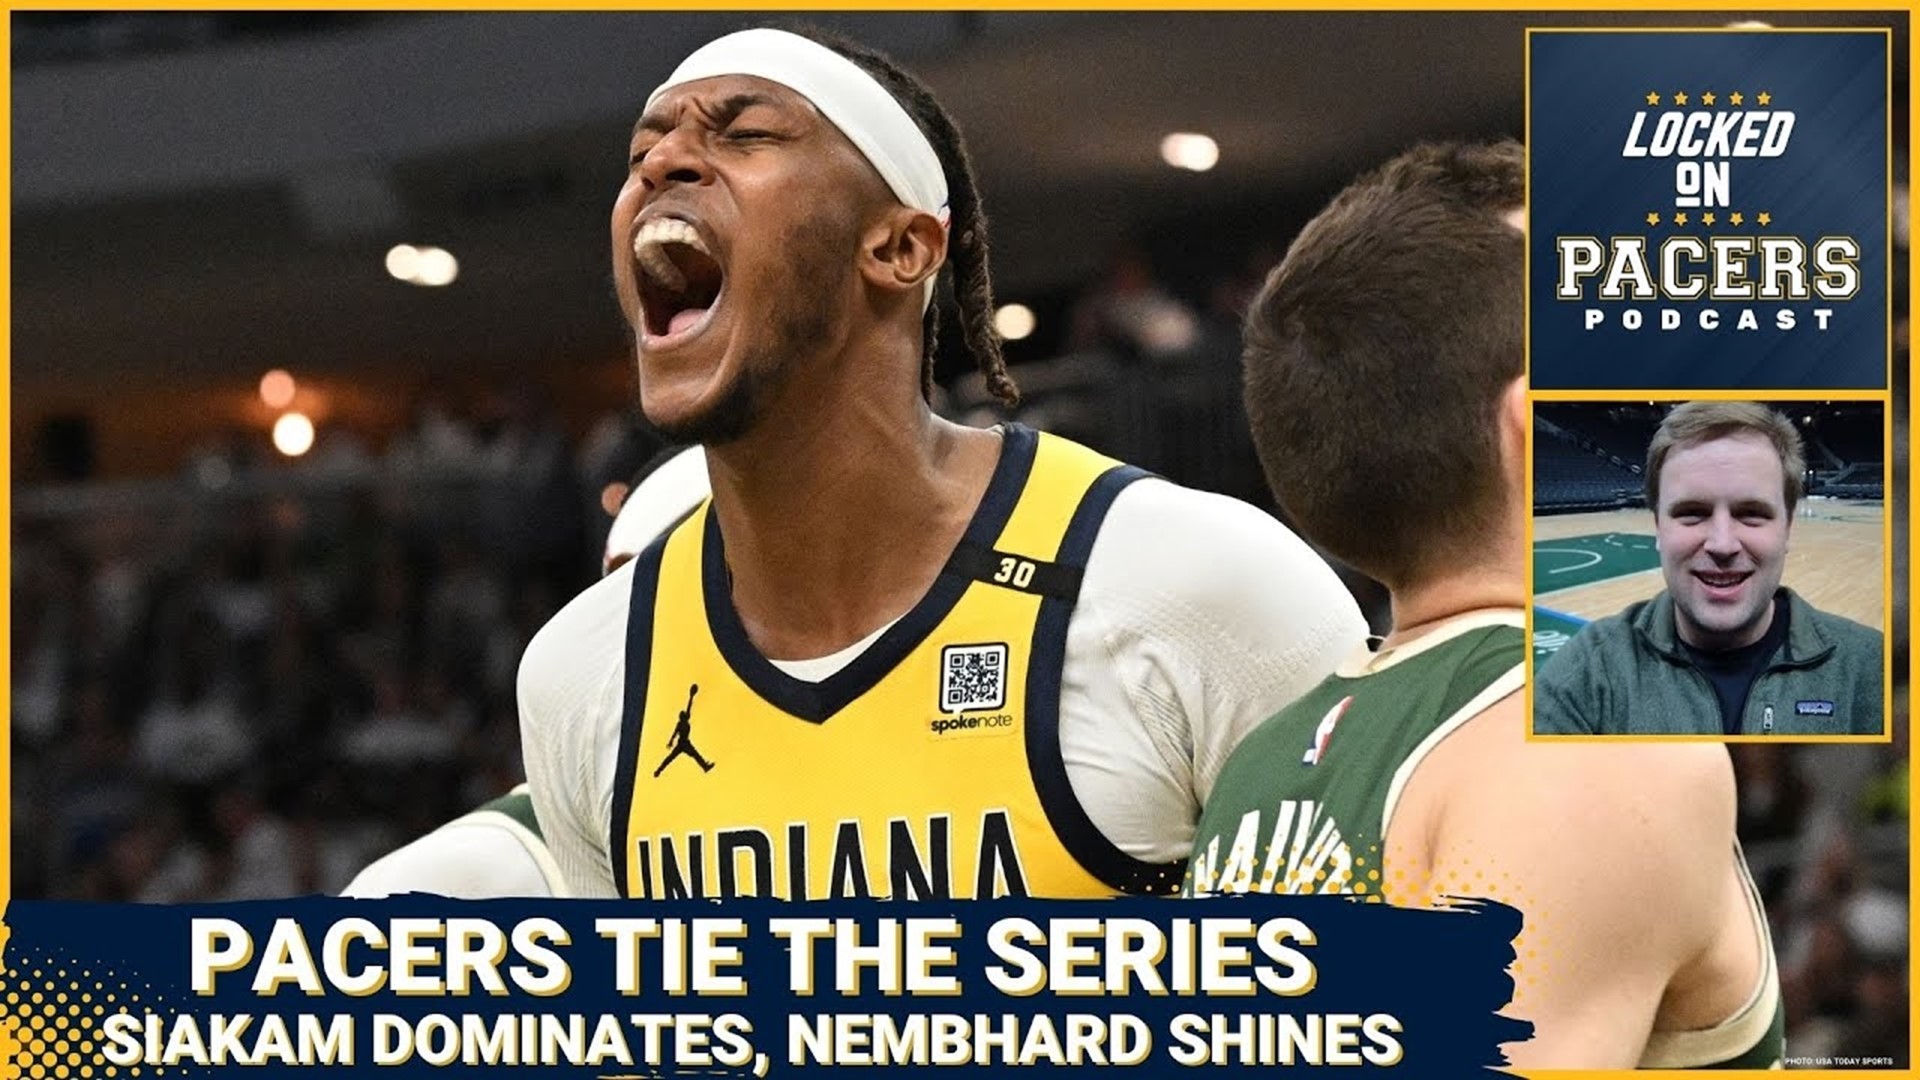 The Indiana Pacers bounced back in a major way and crushed the Milwaukee Bucks in Game 2. How did they do it? Why has Pascal Siakam been so dominant?